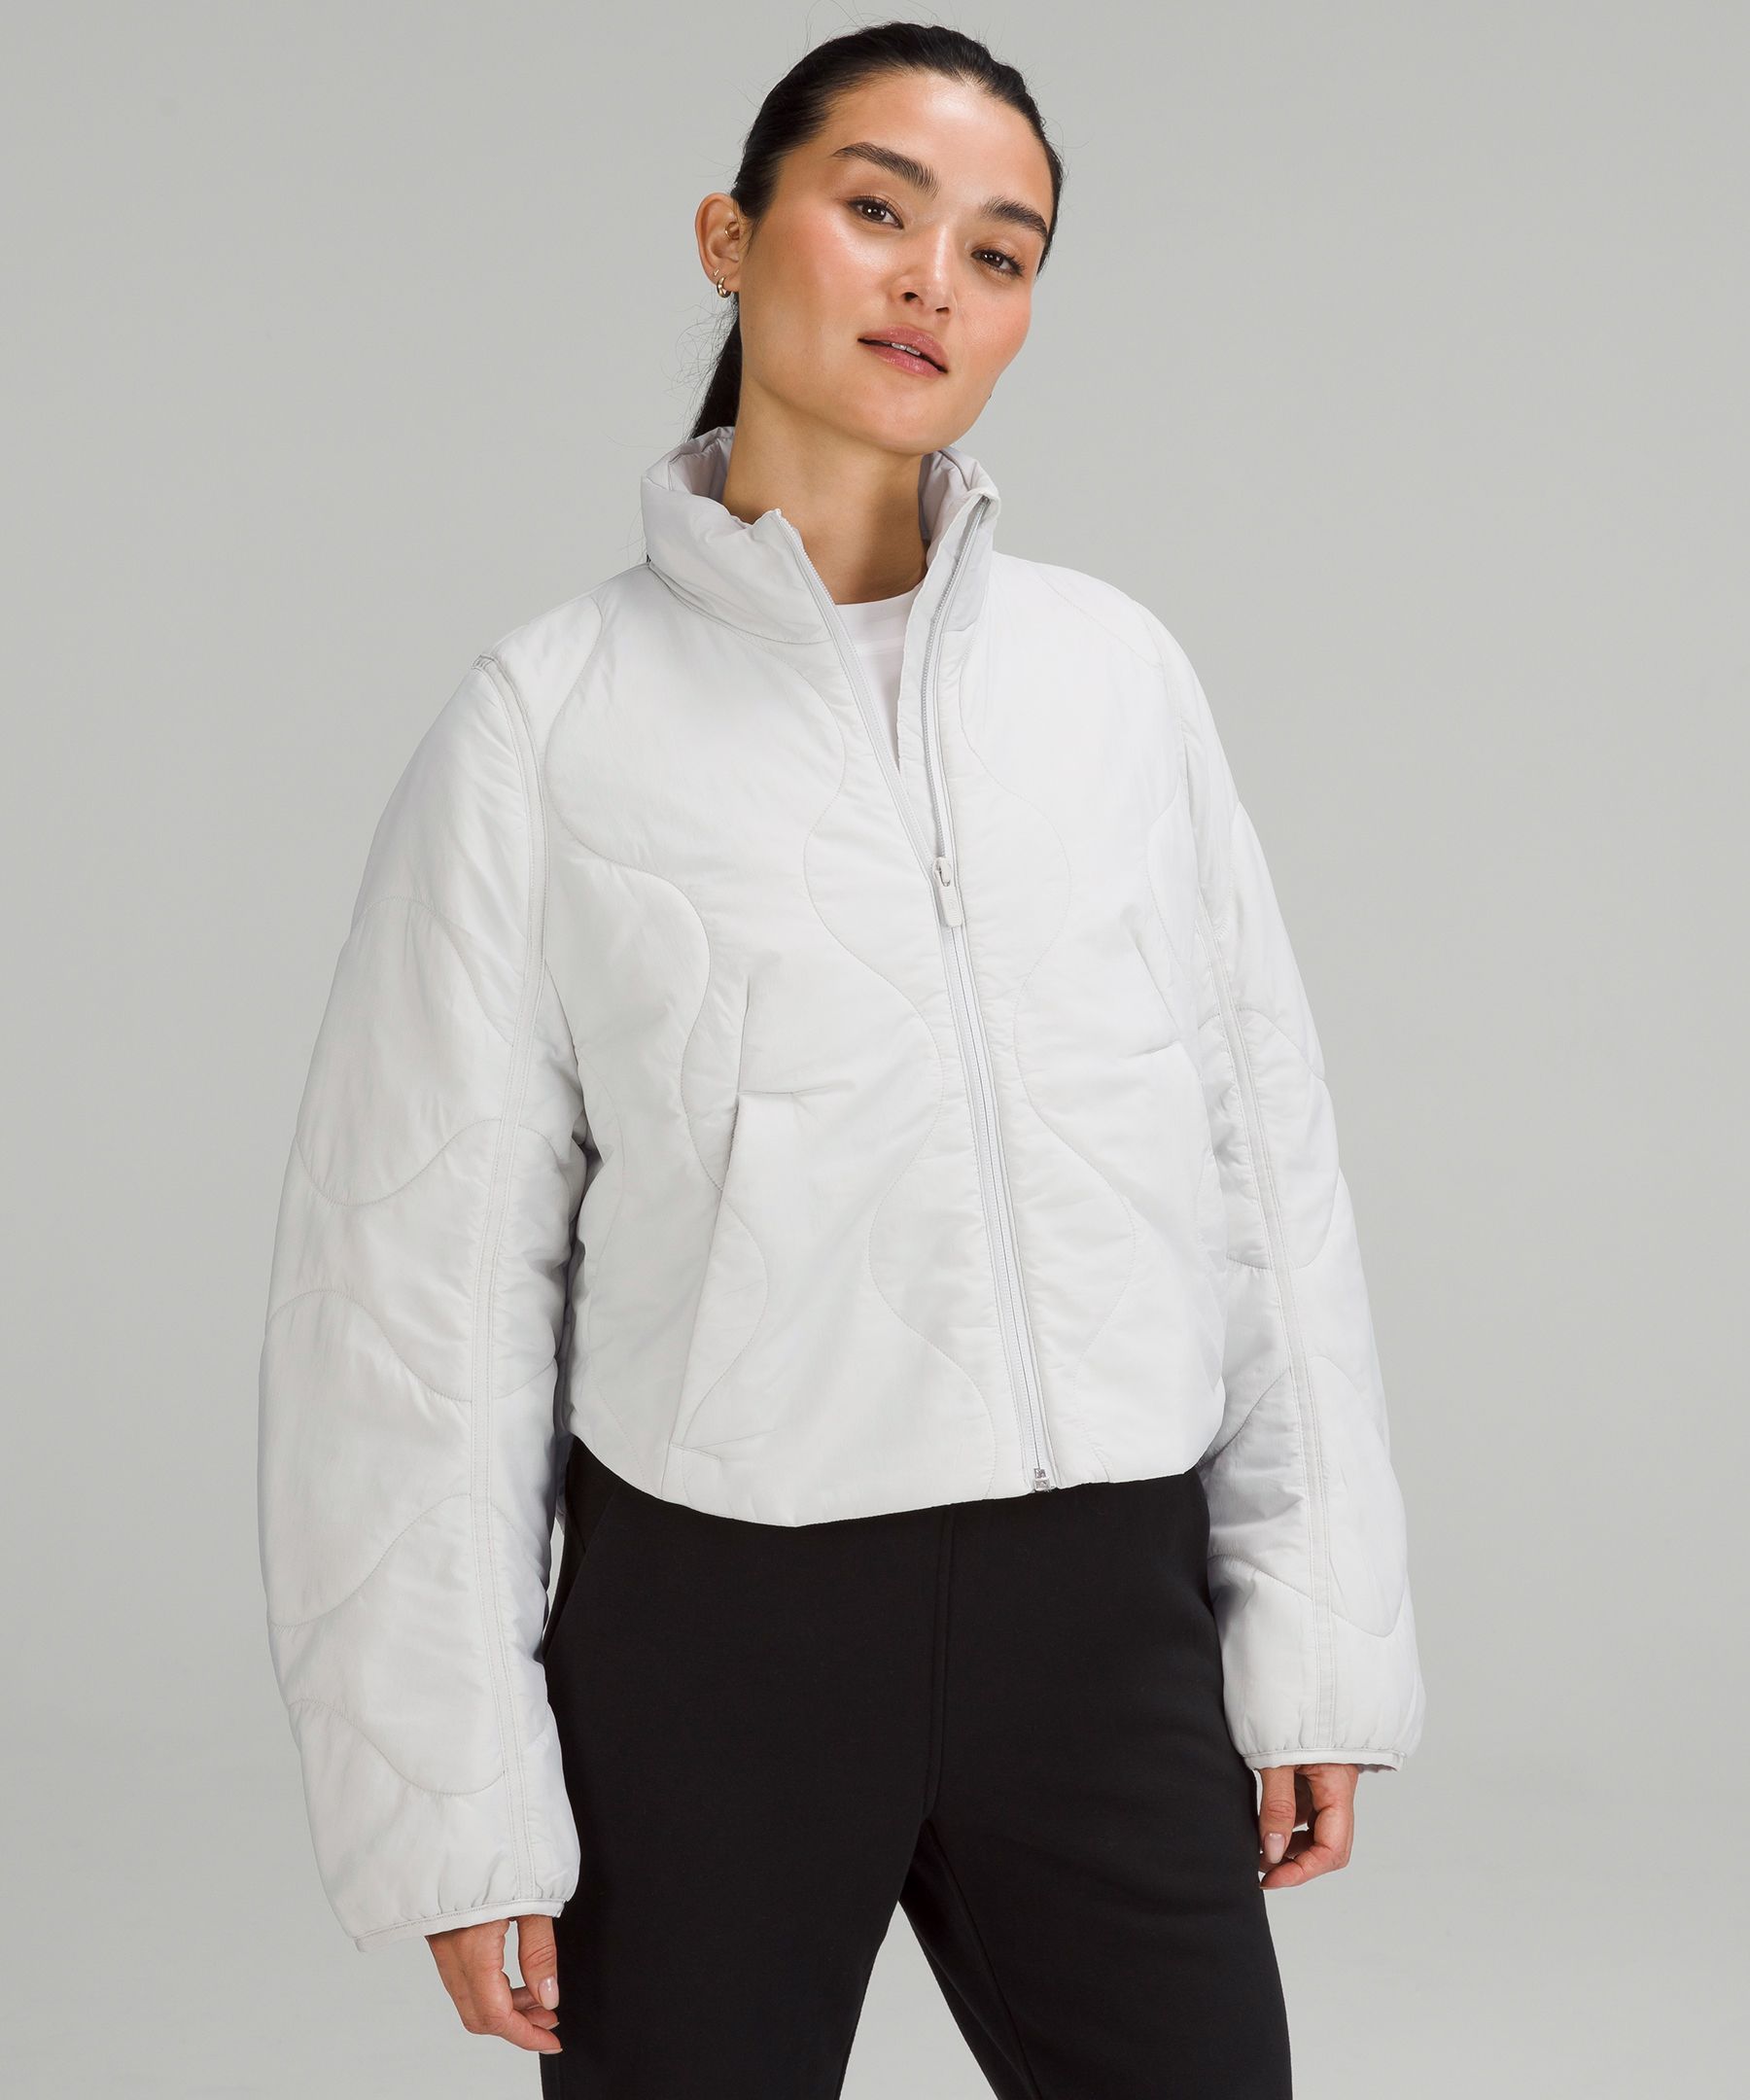 Buy the Lululemon Women's Athletica Light Gray Quilted Pullover